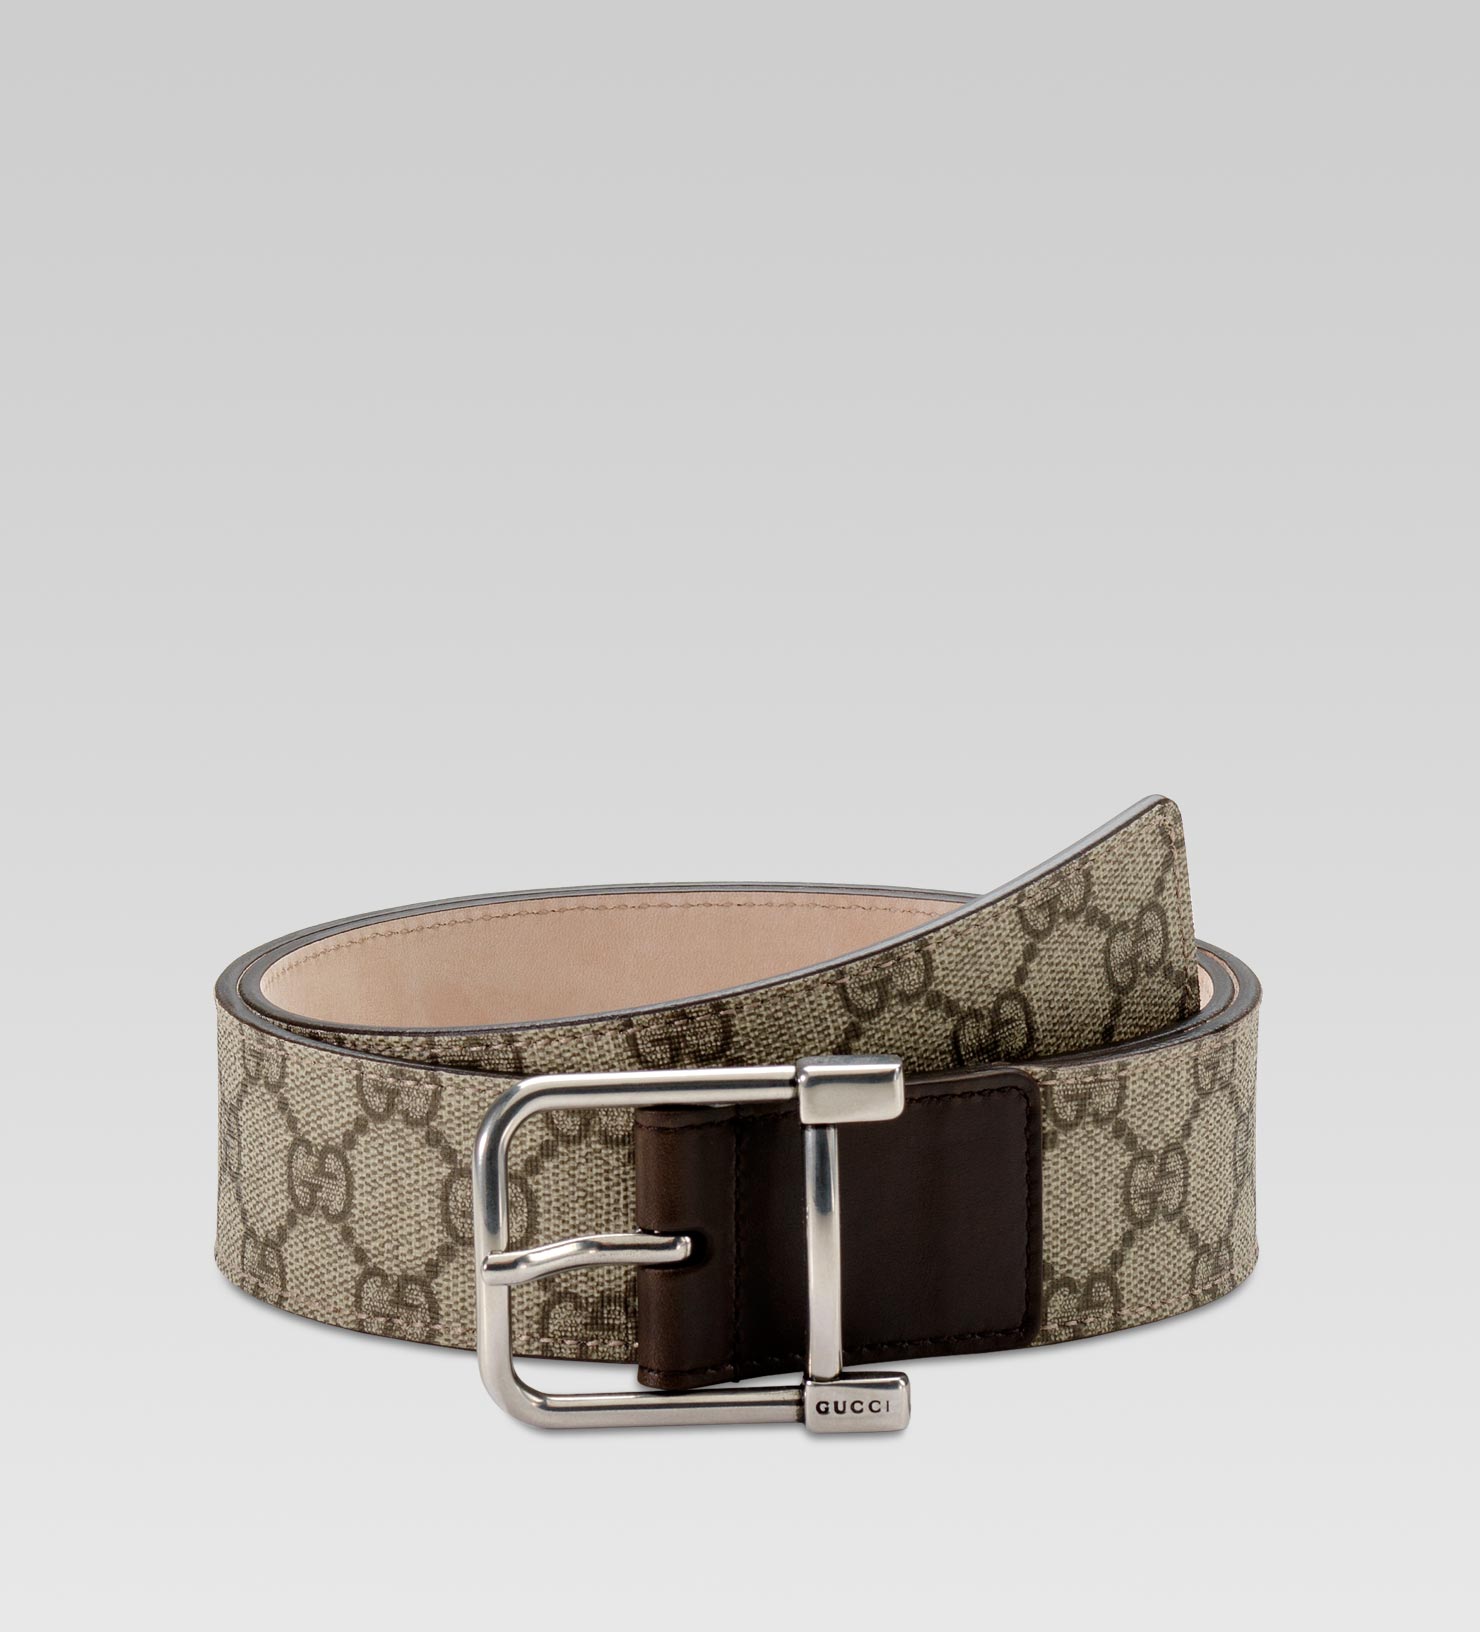 Gucci Belt with Square Spur Buckle in Natural for Men | Lyst